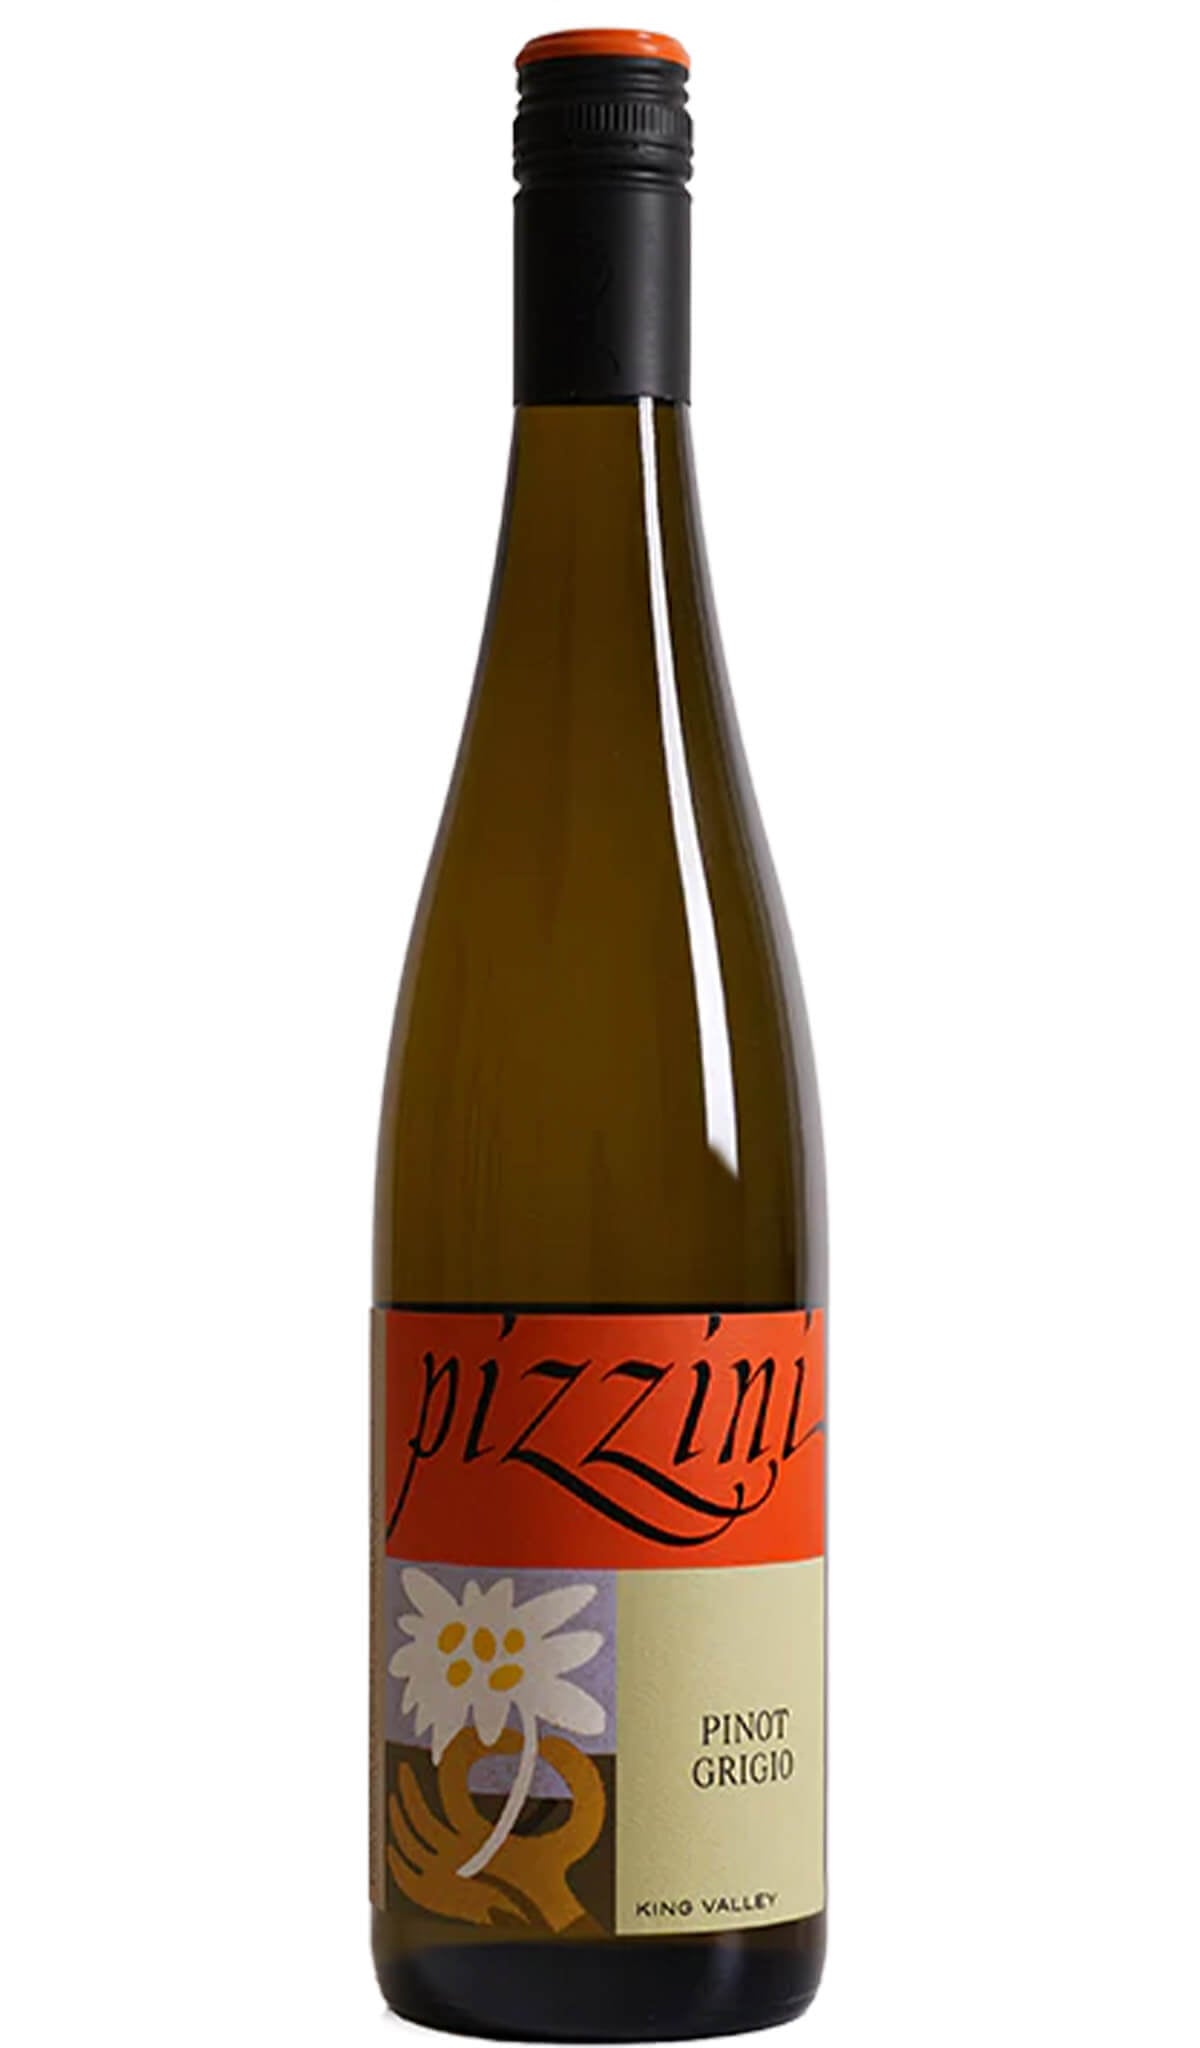 Find out more or buy Pizzini Pinot Grigio 2023 (King Valley) online at Wine Sellers Direct - Australia’s independent liquor specialists.